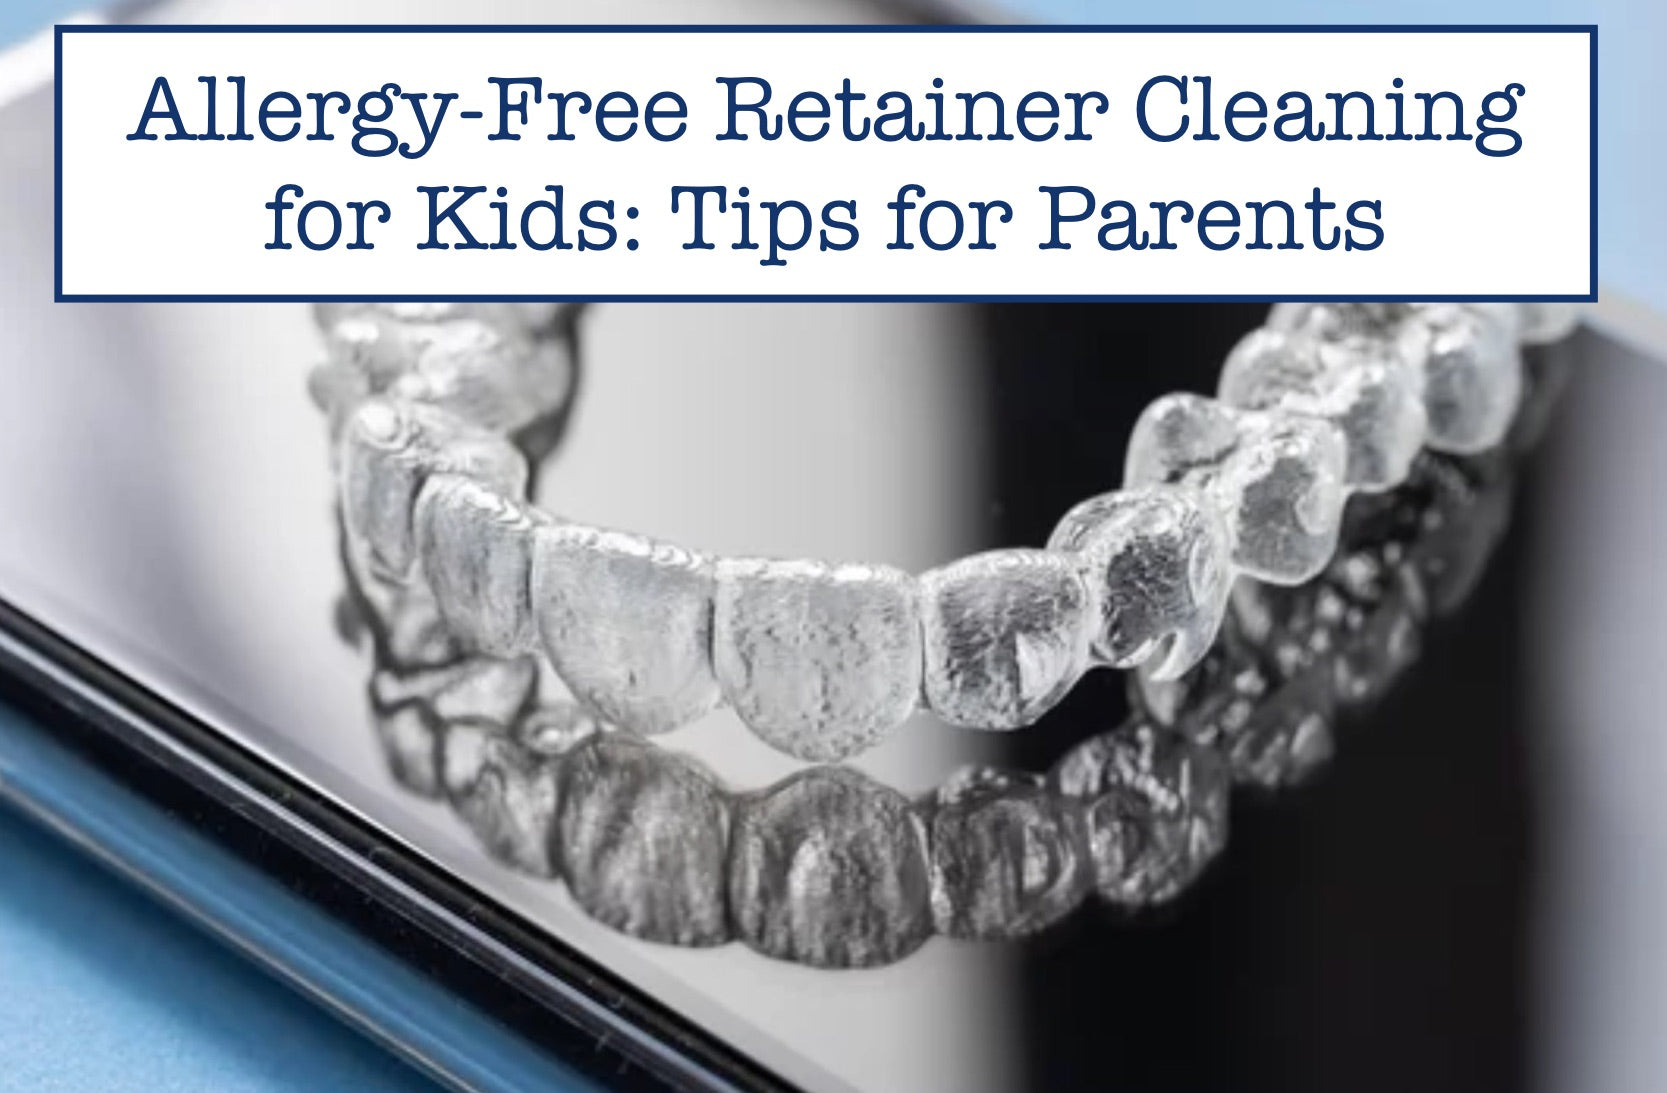 Allergy-Free Retainer Cleaning for Kids: Tips for Parents